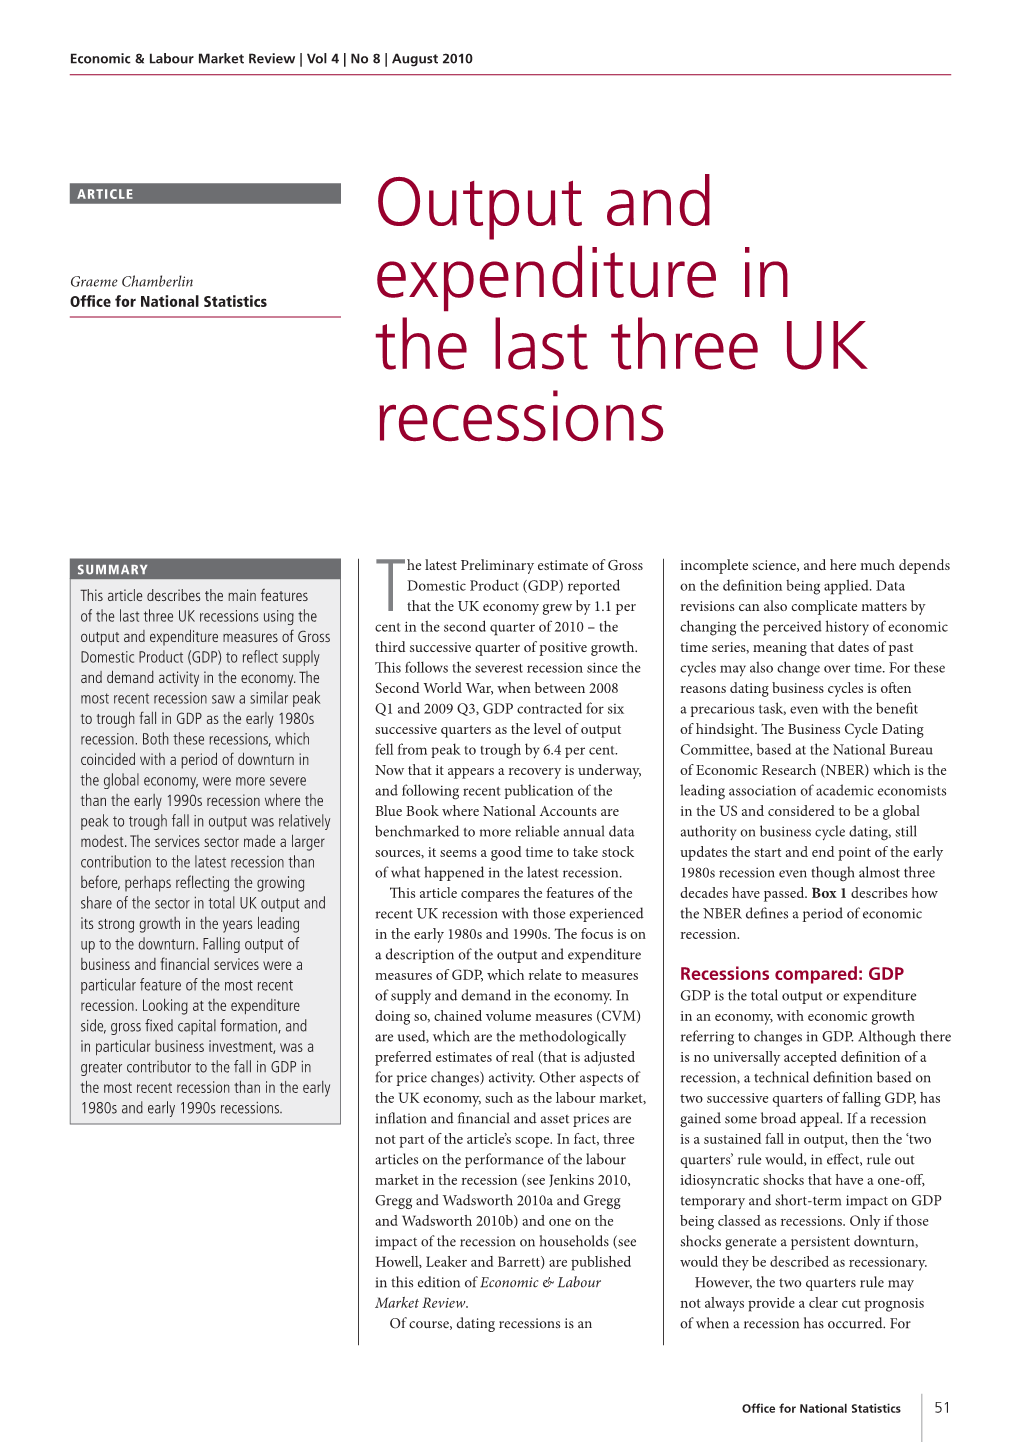 Output and Expenditure in the Last Three UK Recessions Economic & Labour Market Review | Vol 4 | No 8 | August 2010